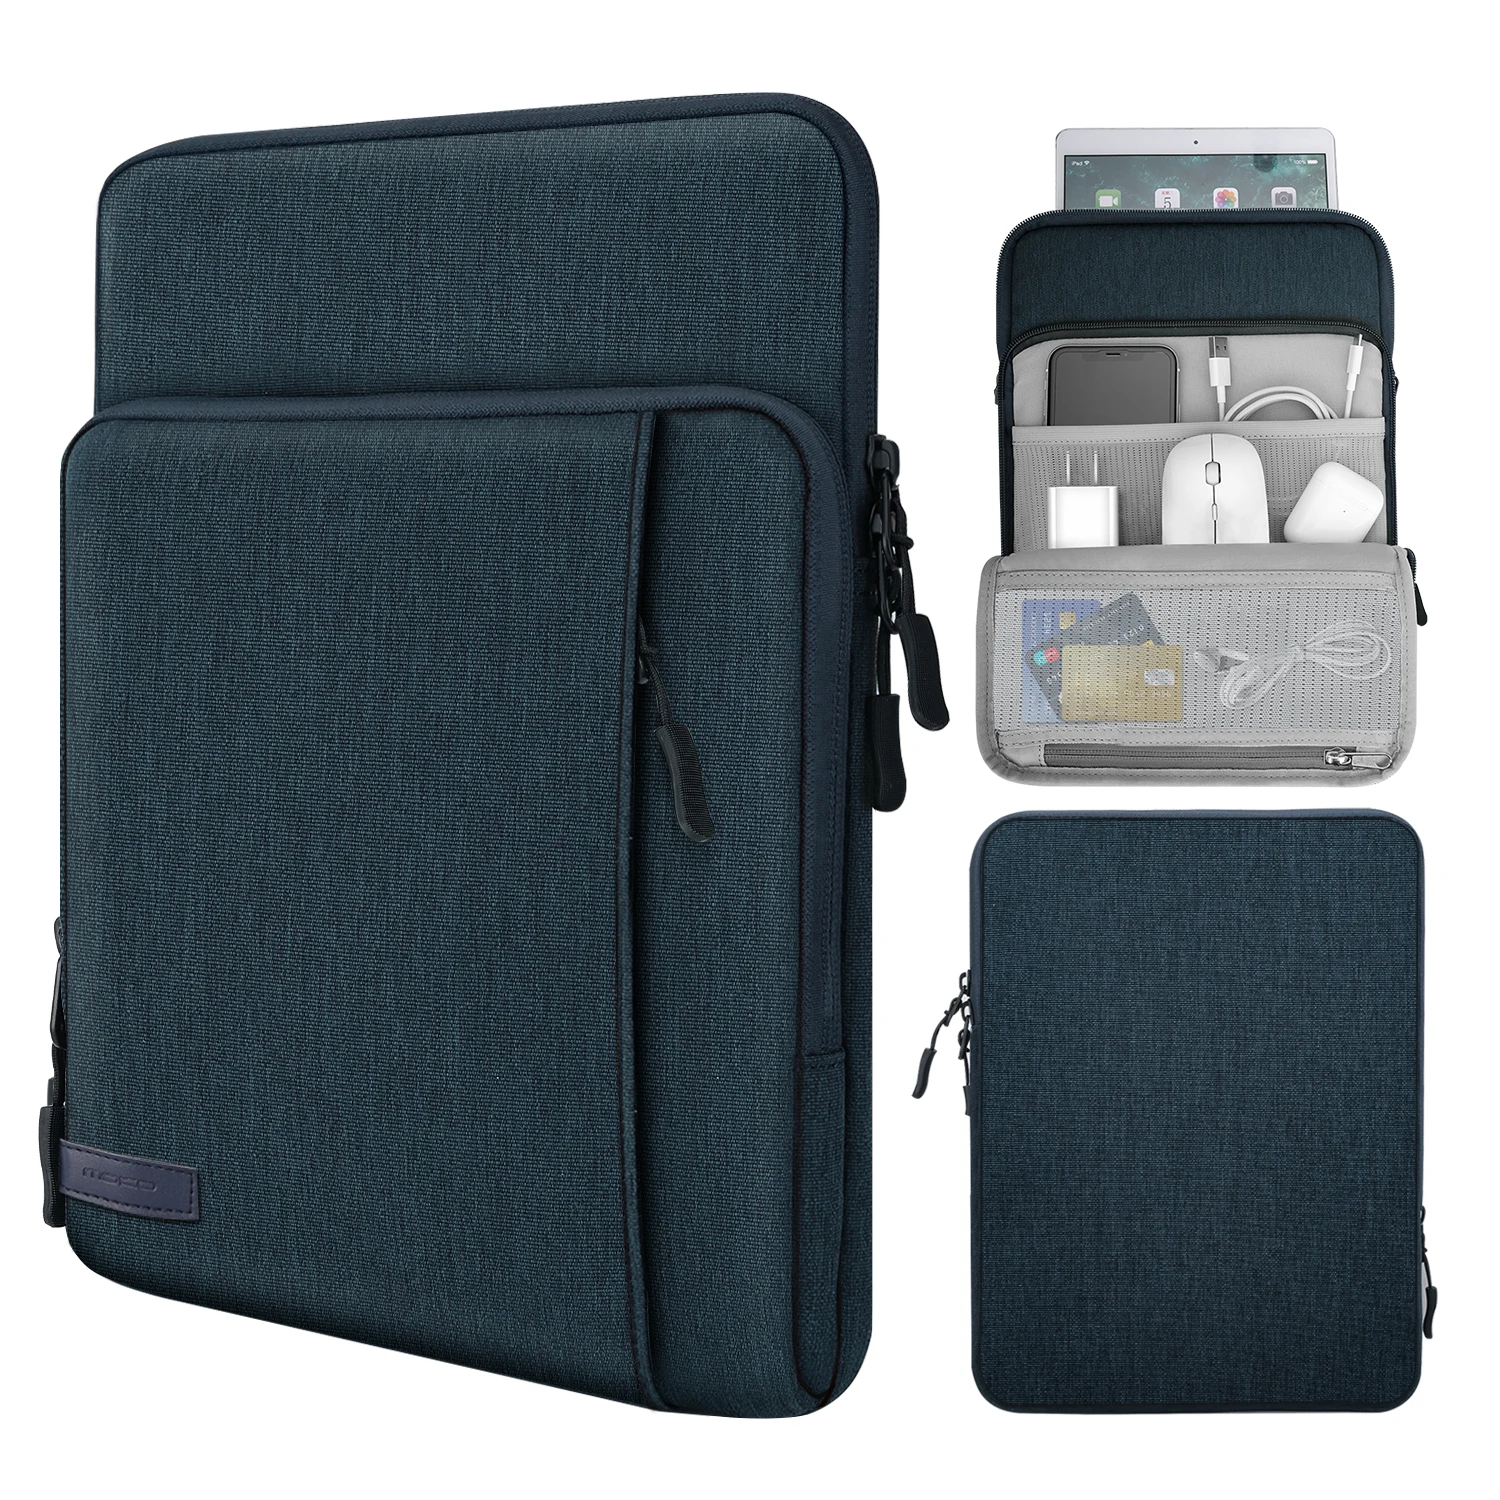 9-11 Inch Tablet Sleeve Bag Carrying Case with Storage Pockets For Samsung Galaxy Tab S6 Lite,Galaxy Tab S7,iPad Pro 11/iPad 9.7